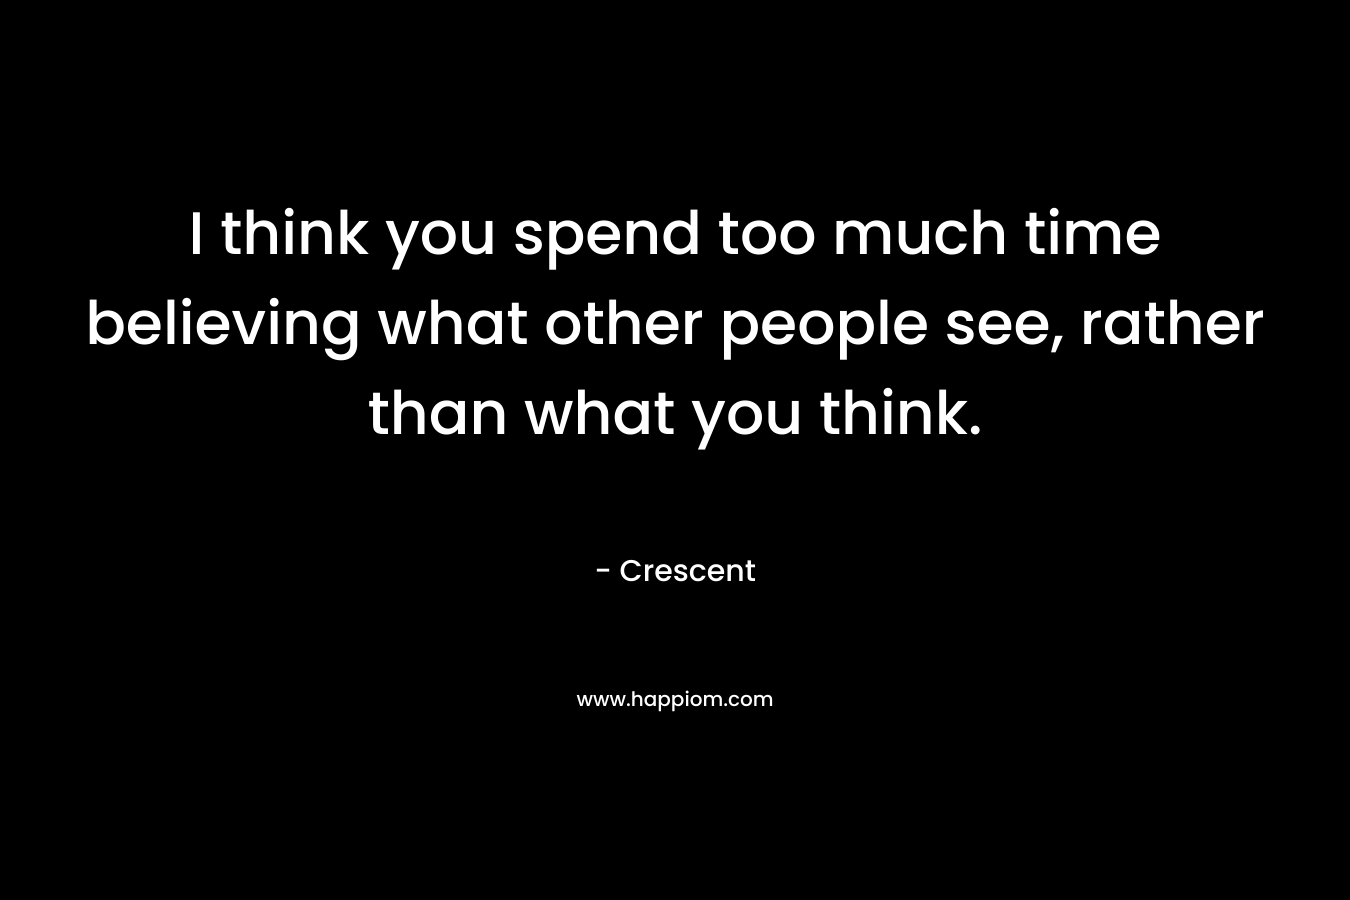 I think you spend too much time believing what other people see, rather than what you think.